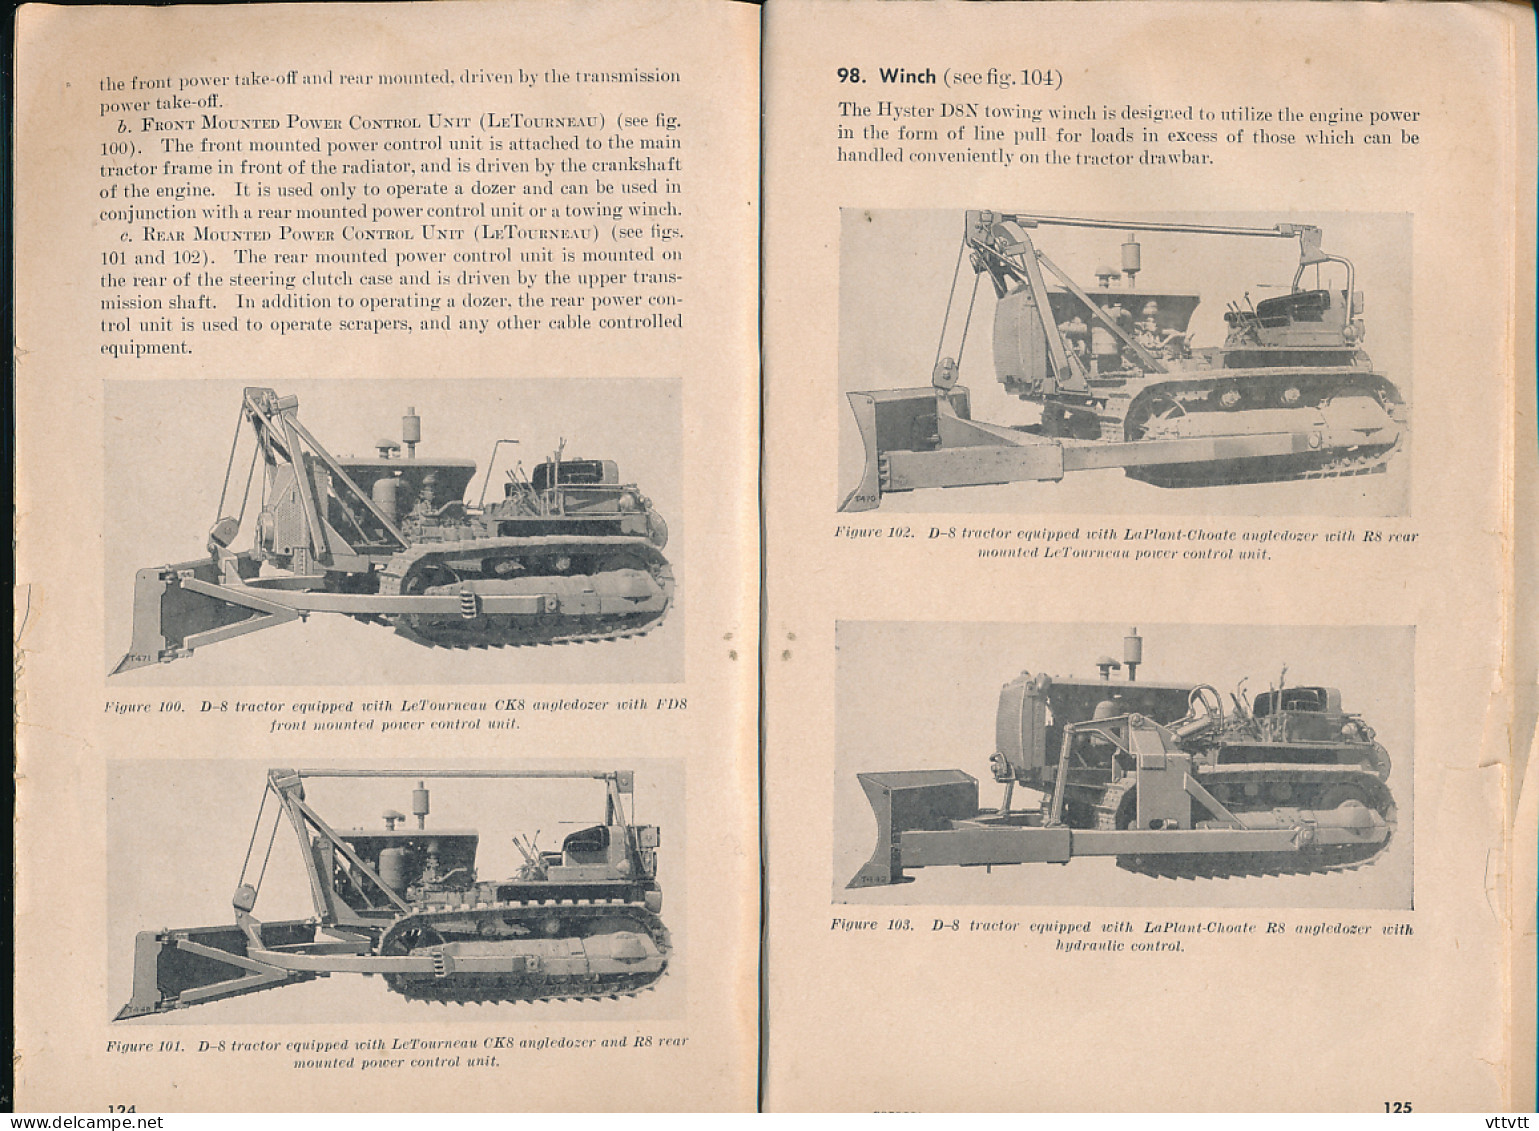 TRACTOR STANDART CATERPILLAR D-8 (1949), EN ANGLAIS : Départments of the Army and Air Force, Maintenance Instructions